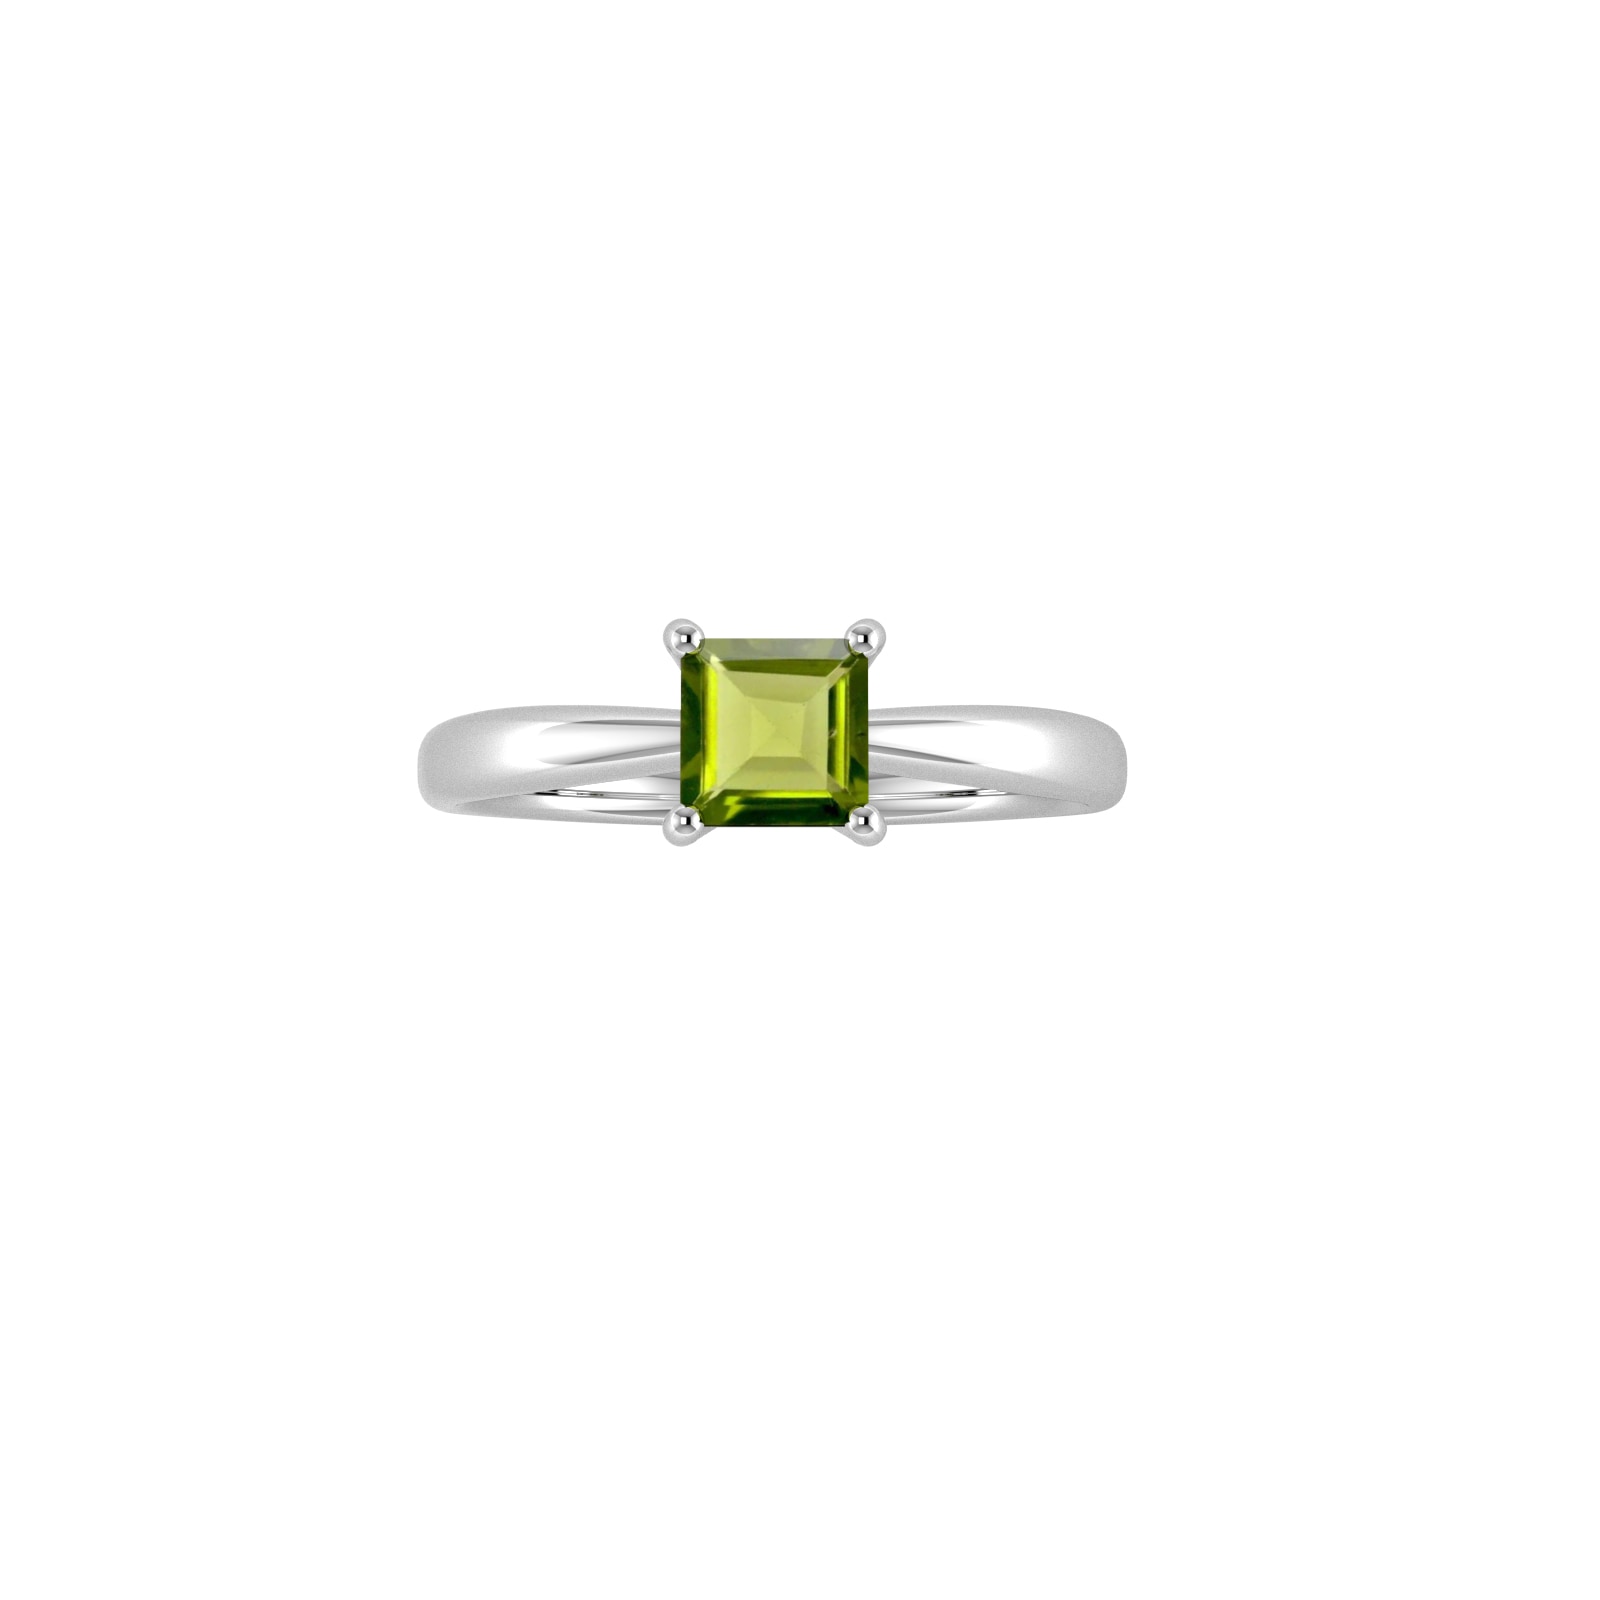 9ct White Gold 4 Claw Square Peridot 5mm x 5mm Ring- Ring Size T.5